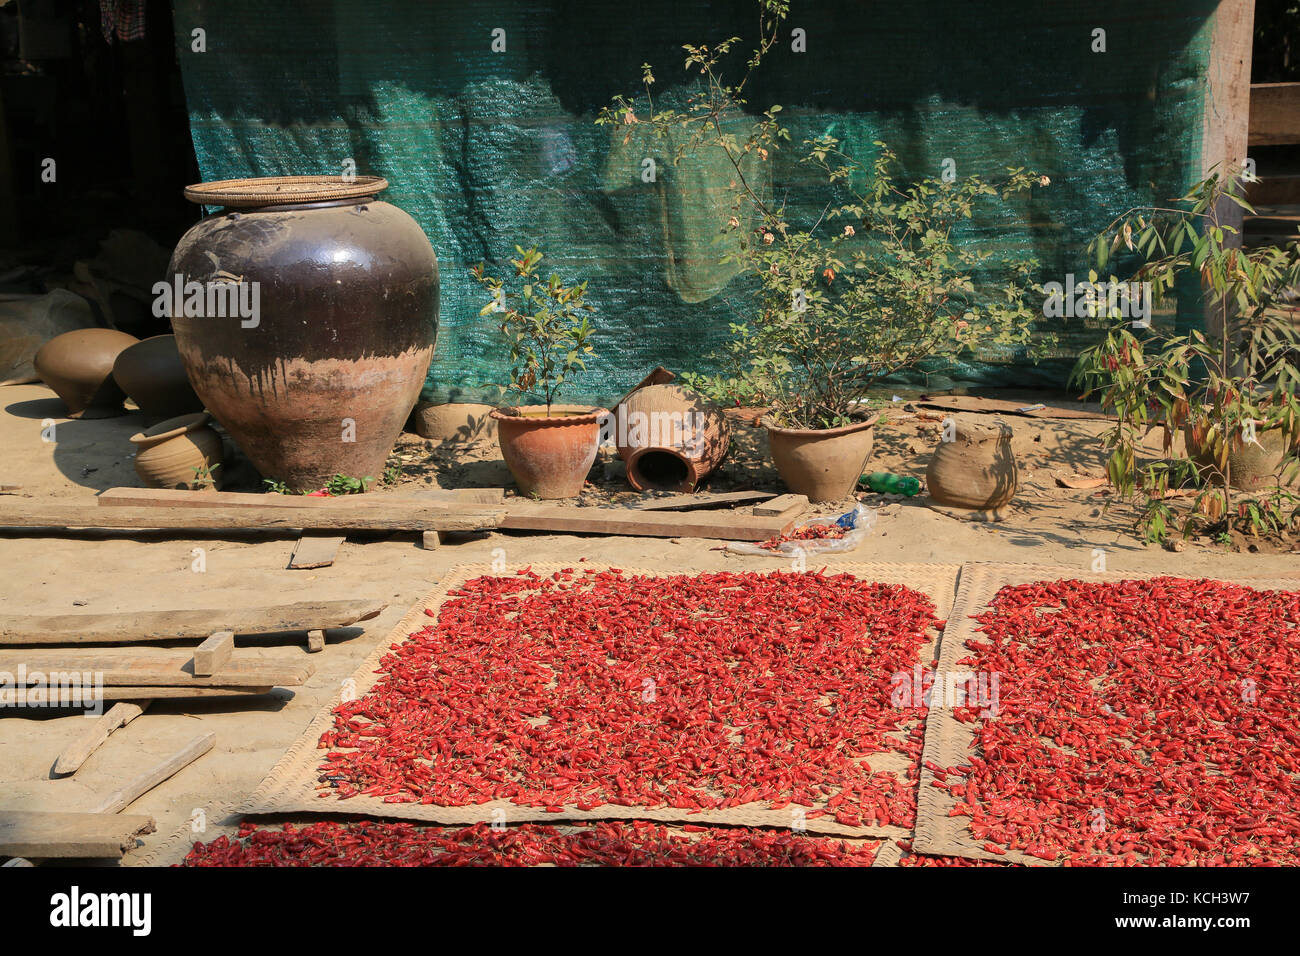 Red chili peppers are being dried on bamboo mats in Yandabo Village on the Irrawaddy River in Myanmar (Burma). Stock Photo